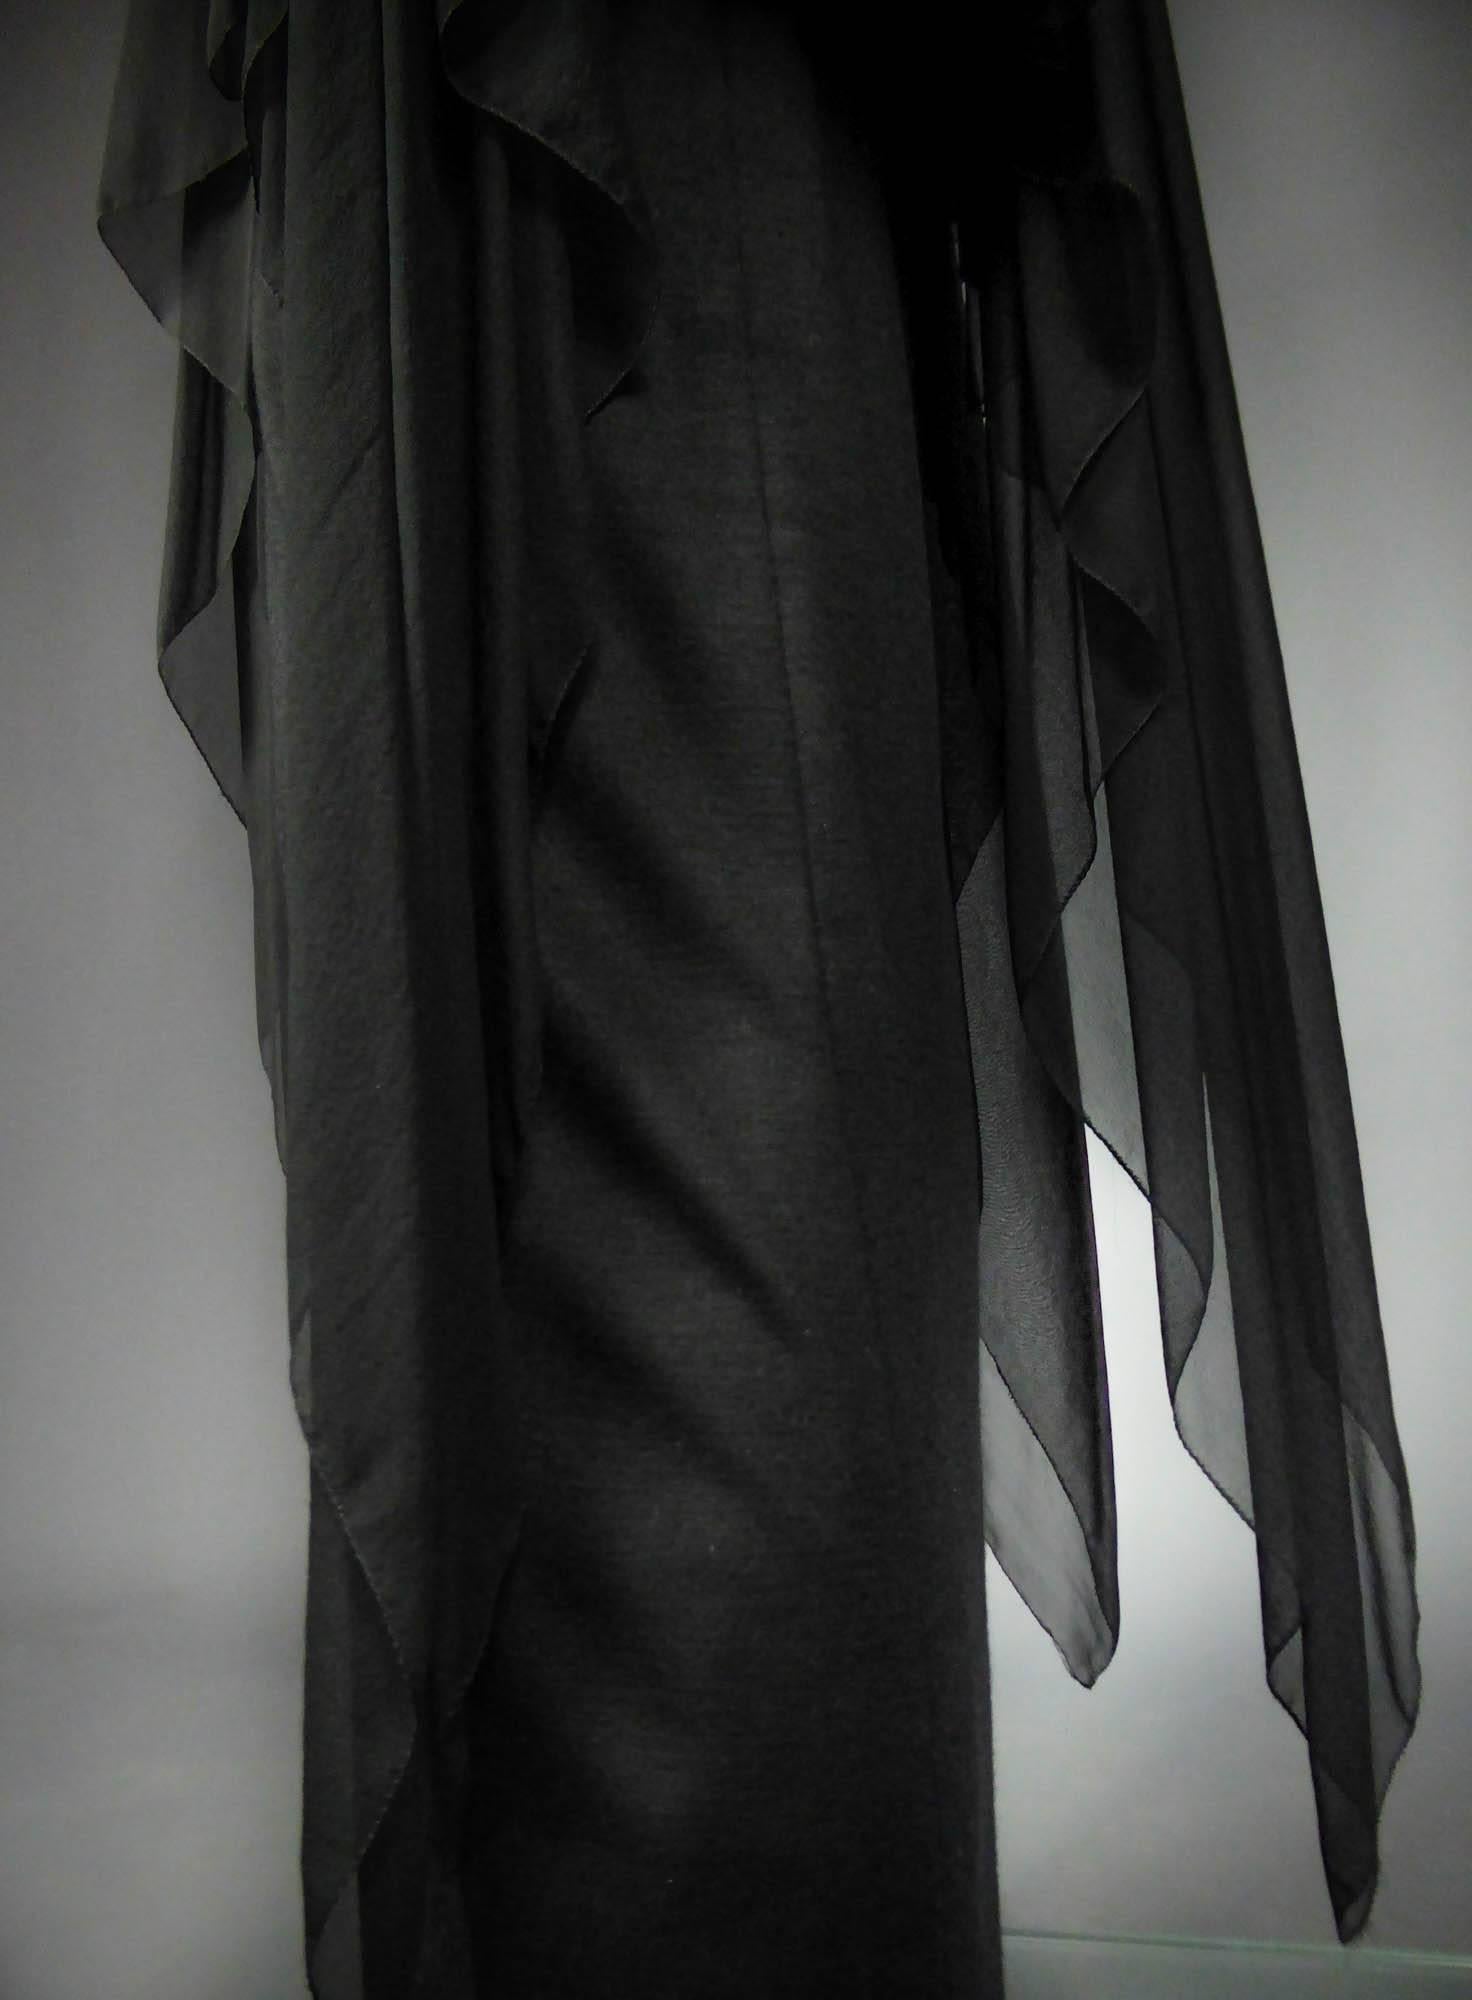 A Christian Dior Haute Couture Evening Dress by Marc Bohan Circa 1975 For Sale 3